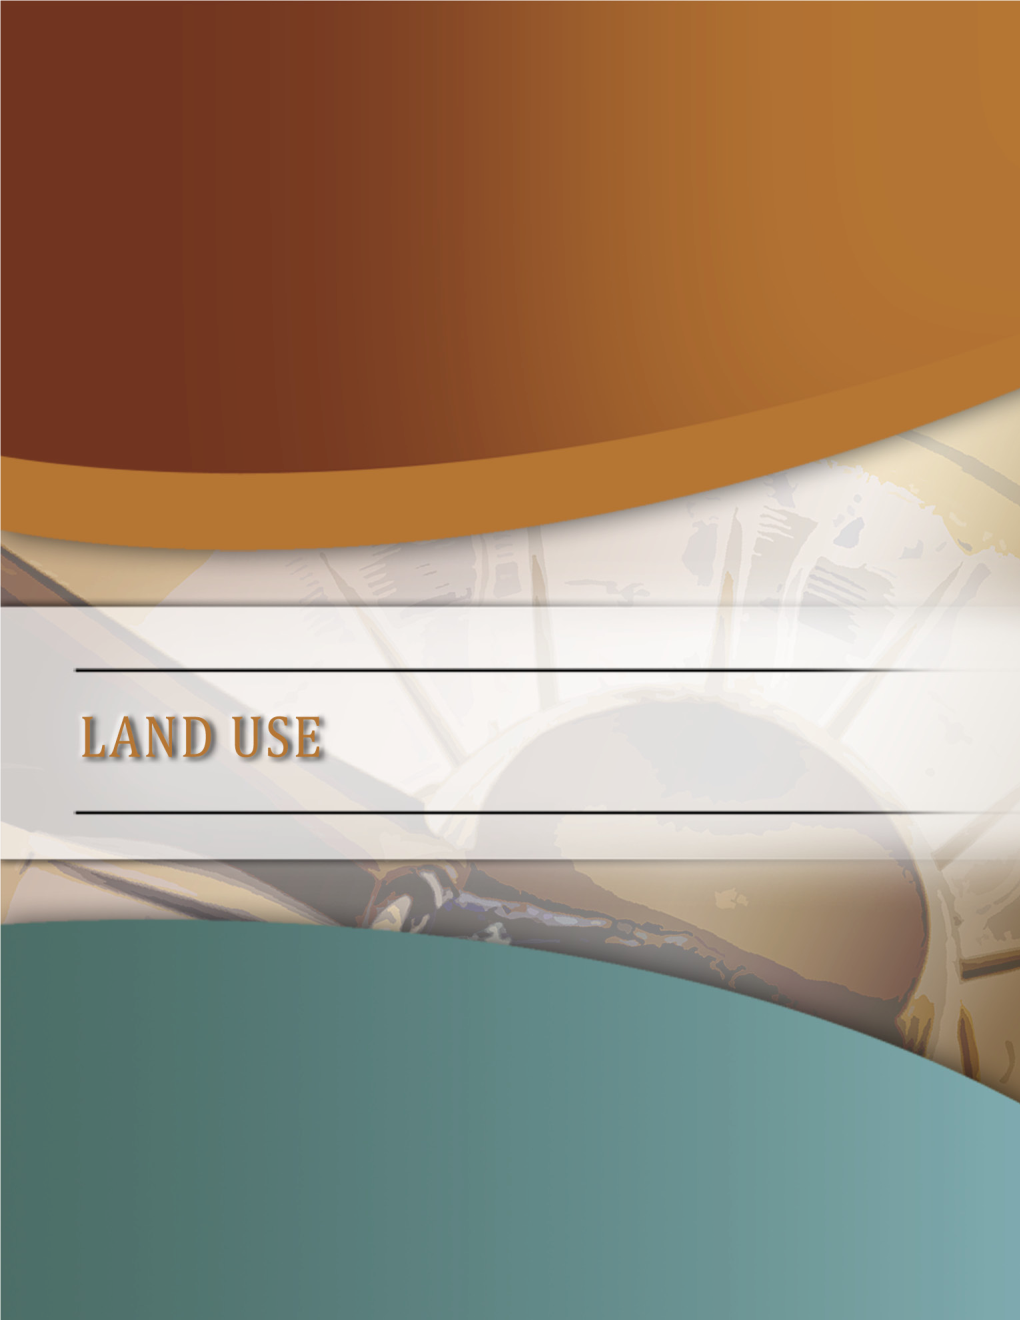 LAND USE This Chapter Deals with Compatible Land Use